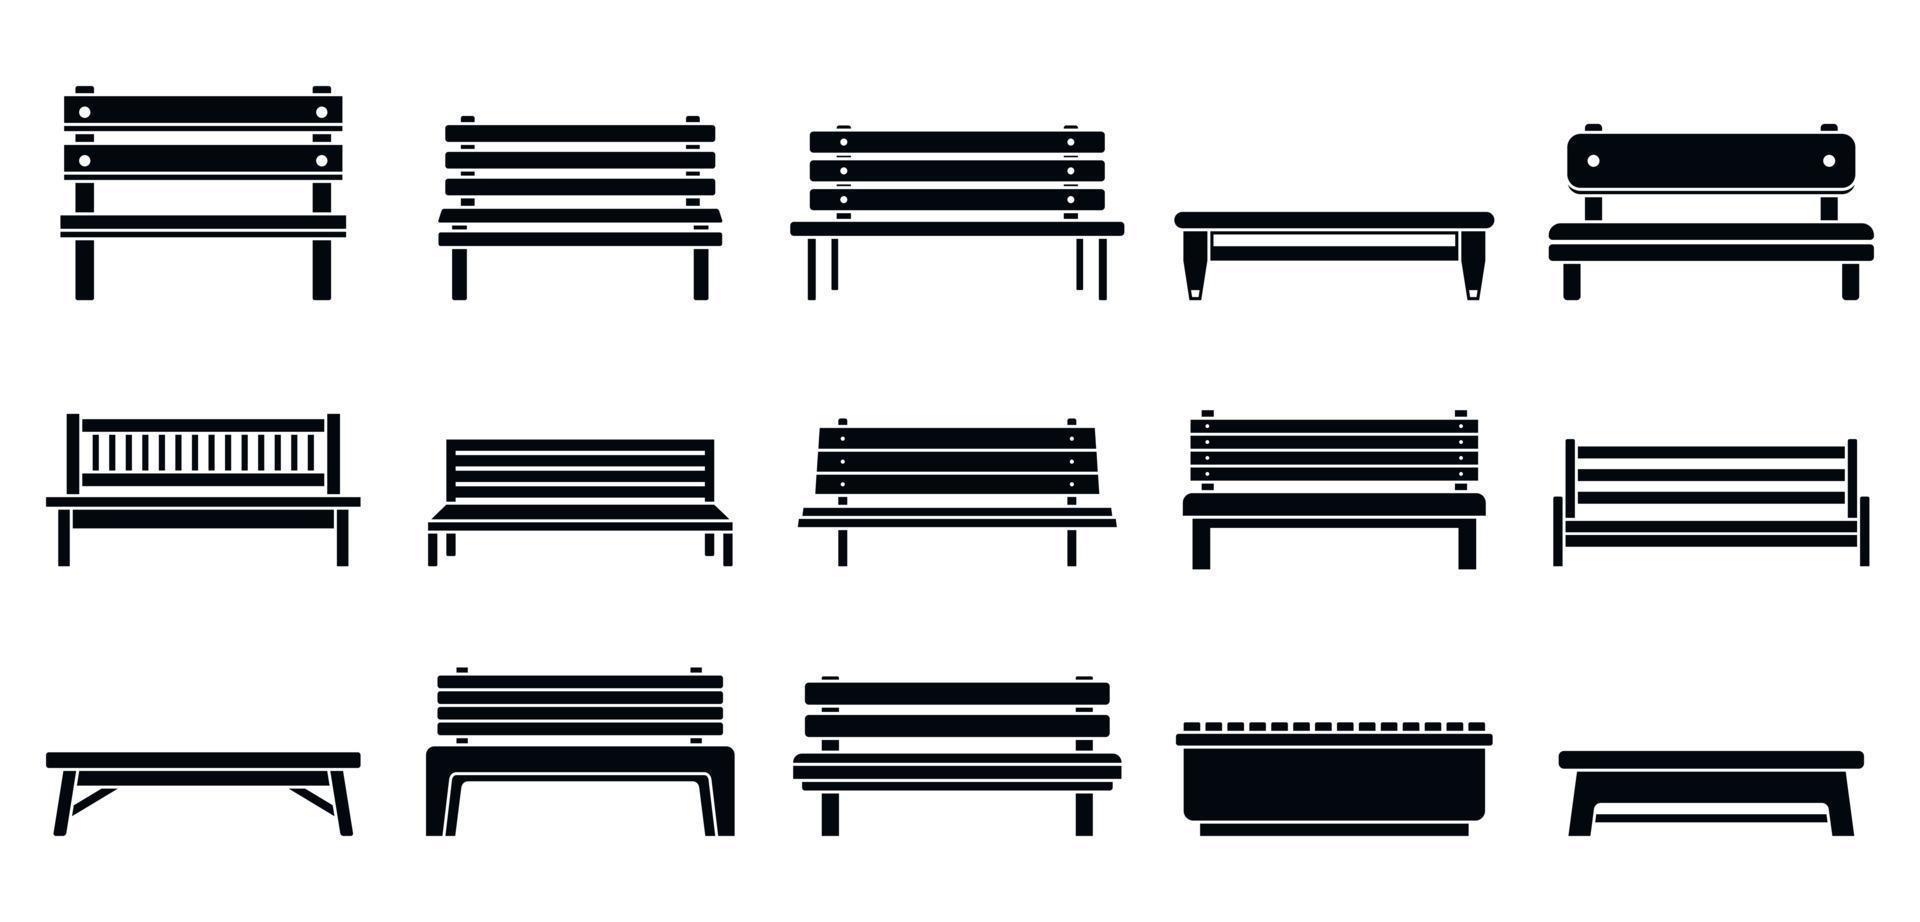 Park bench icons set, simple style vector